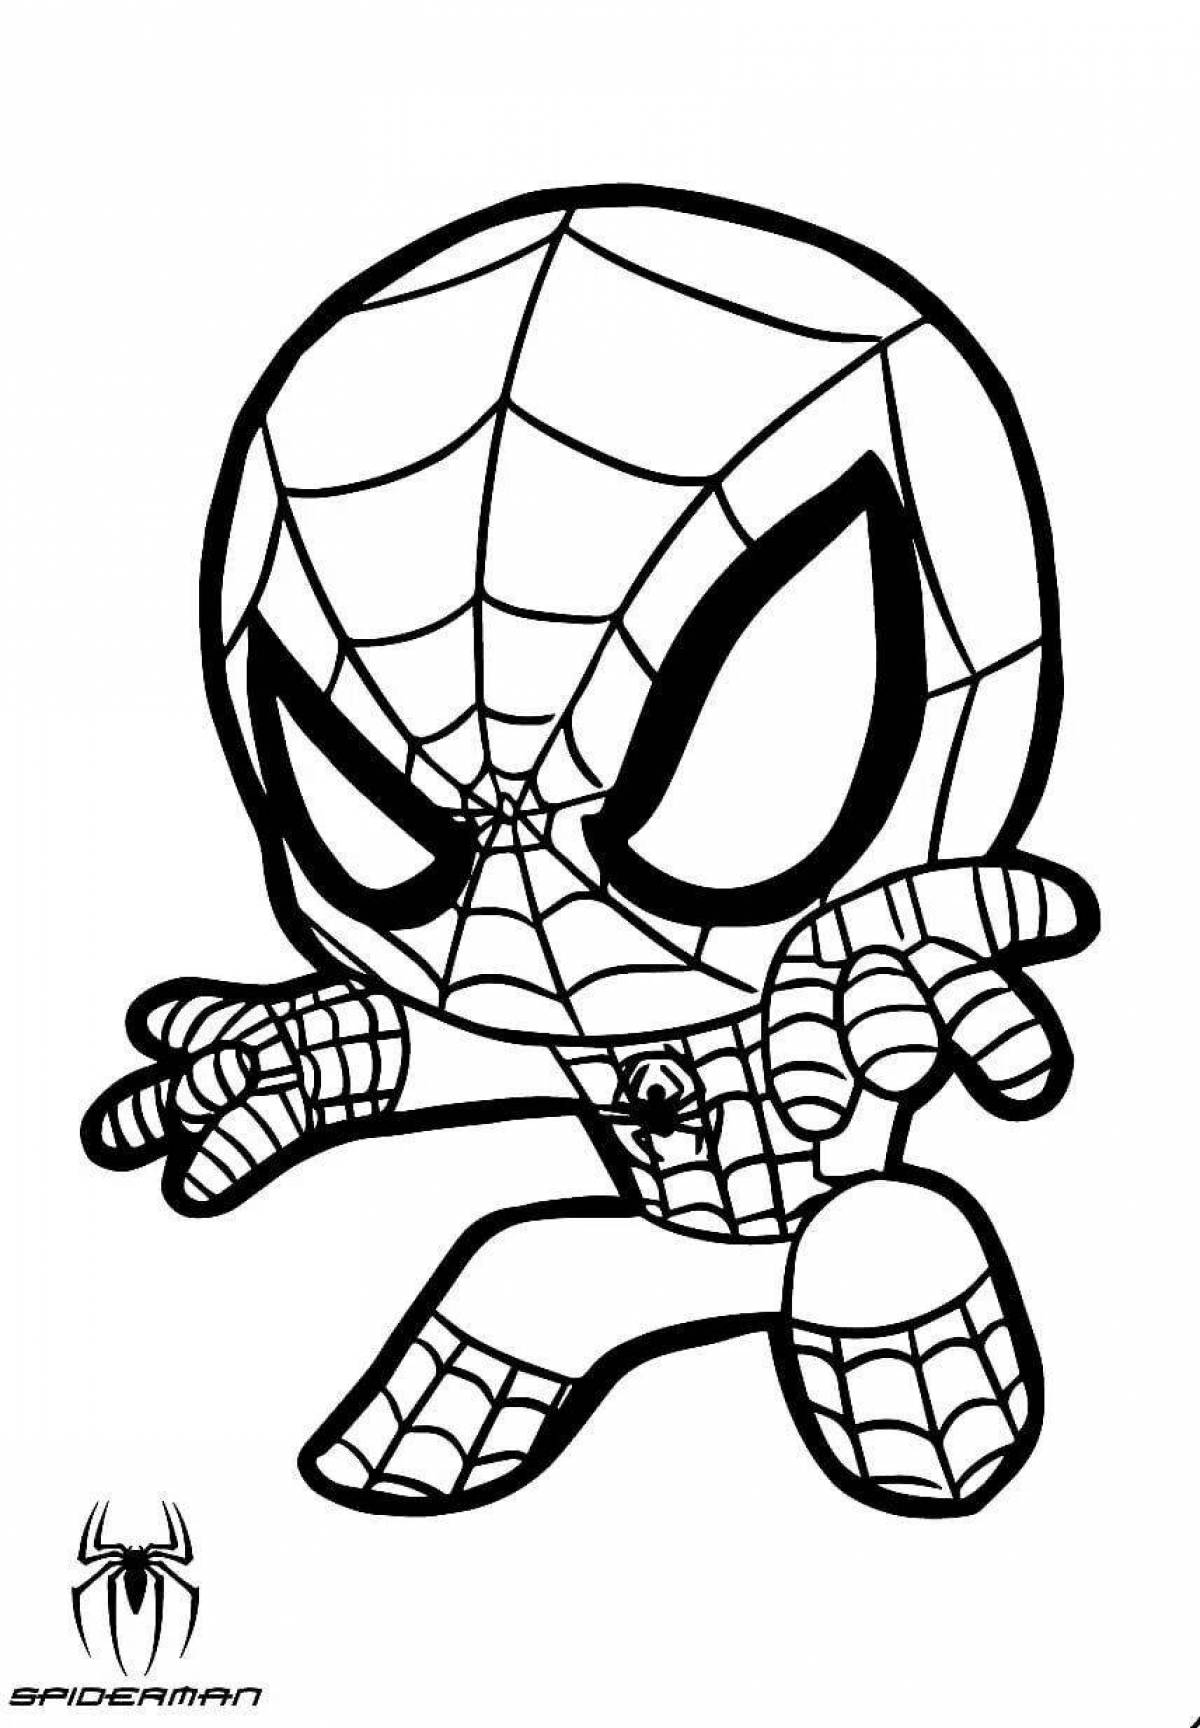 Spiderman team live coloring page